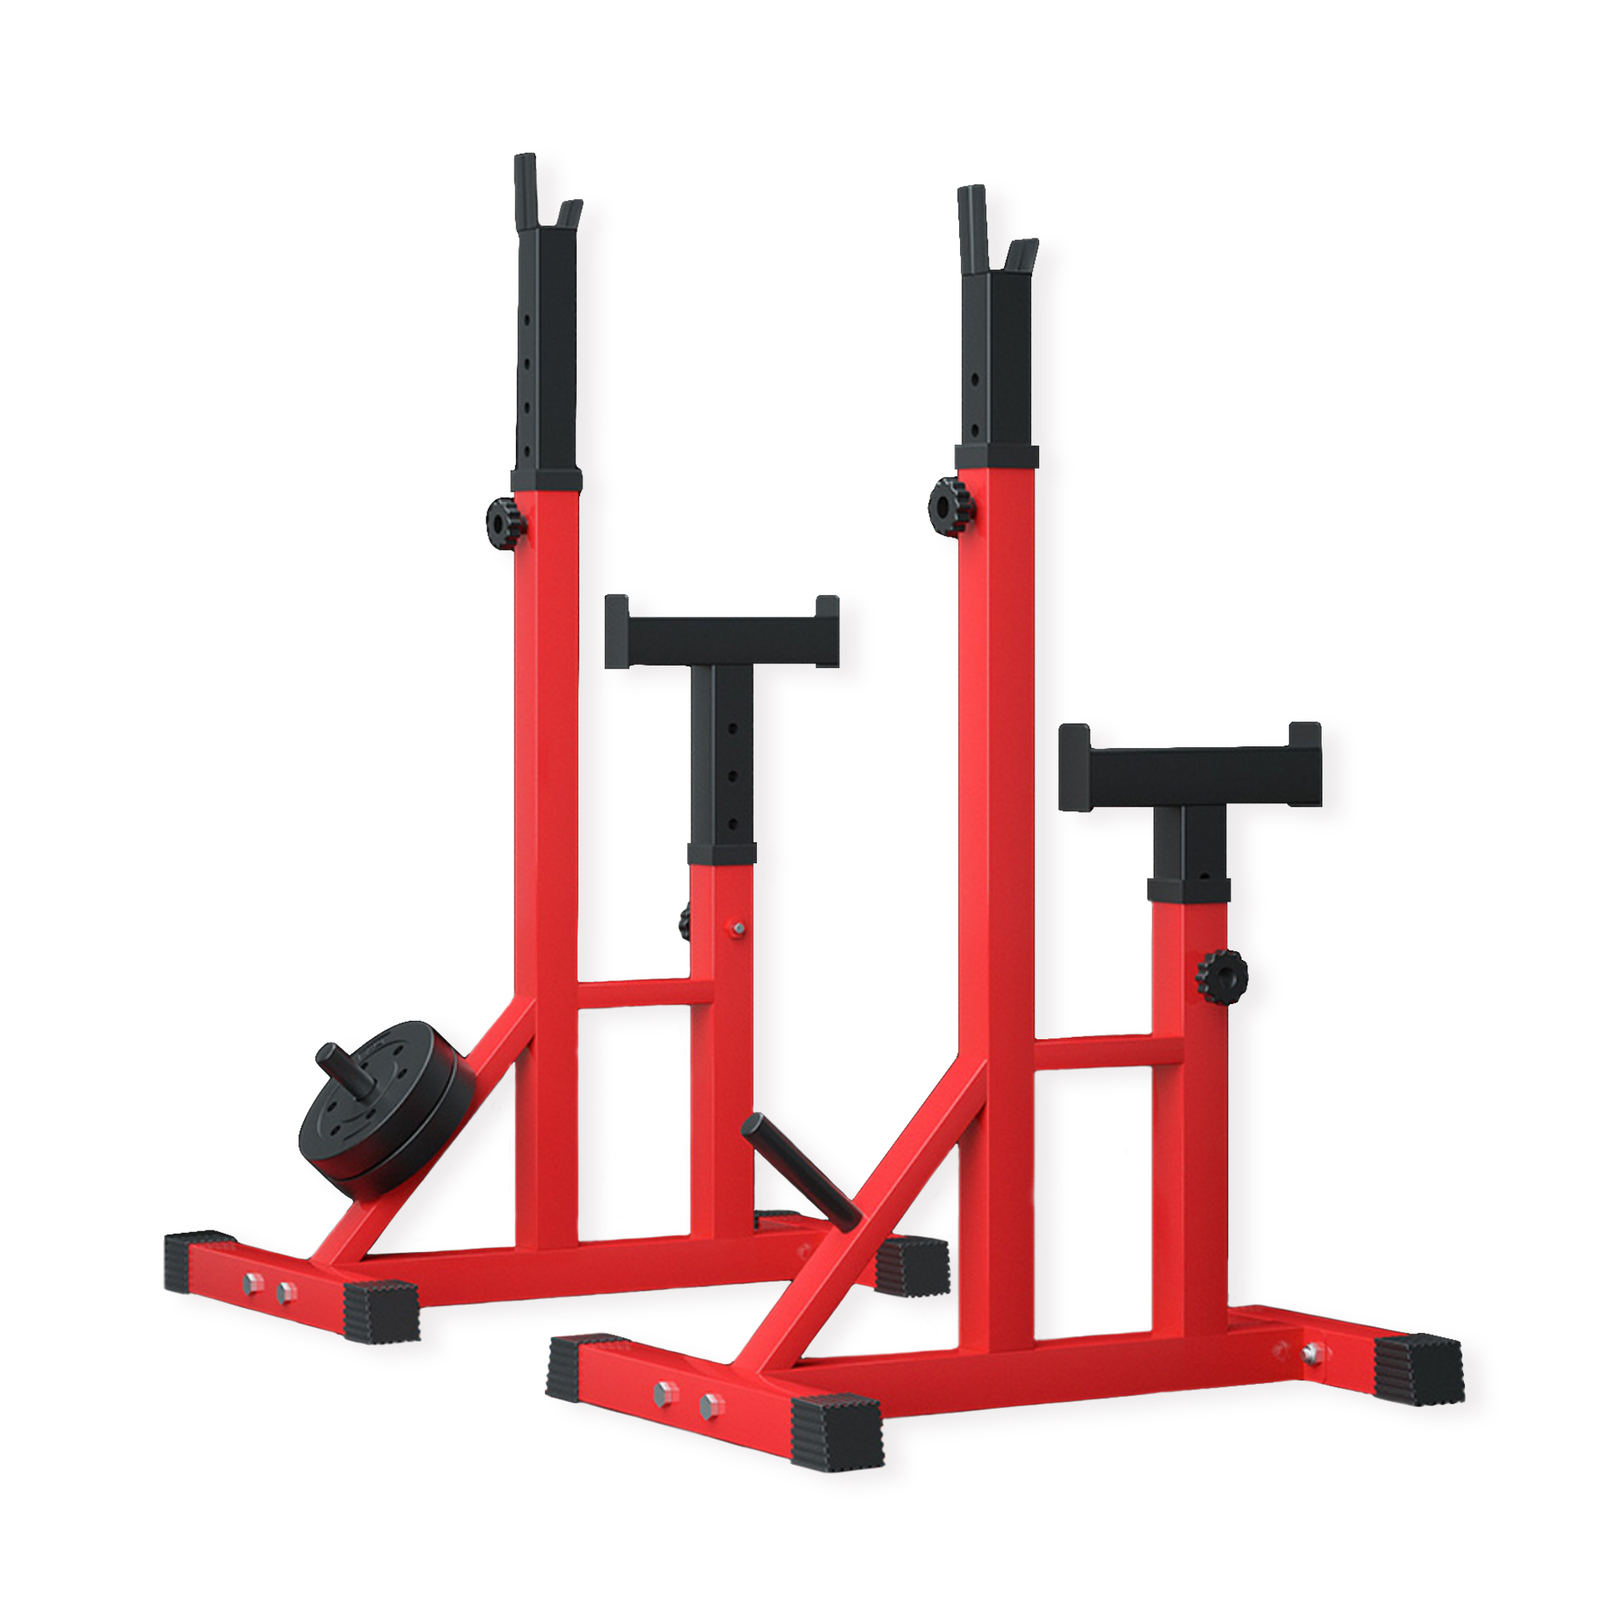 FitnessLab Adjustable Squat Rack Fitness Exercise Weight Lifting Home Gym Barbell Stand